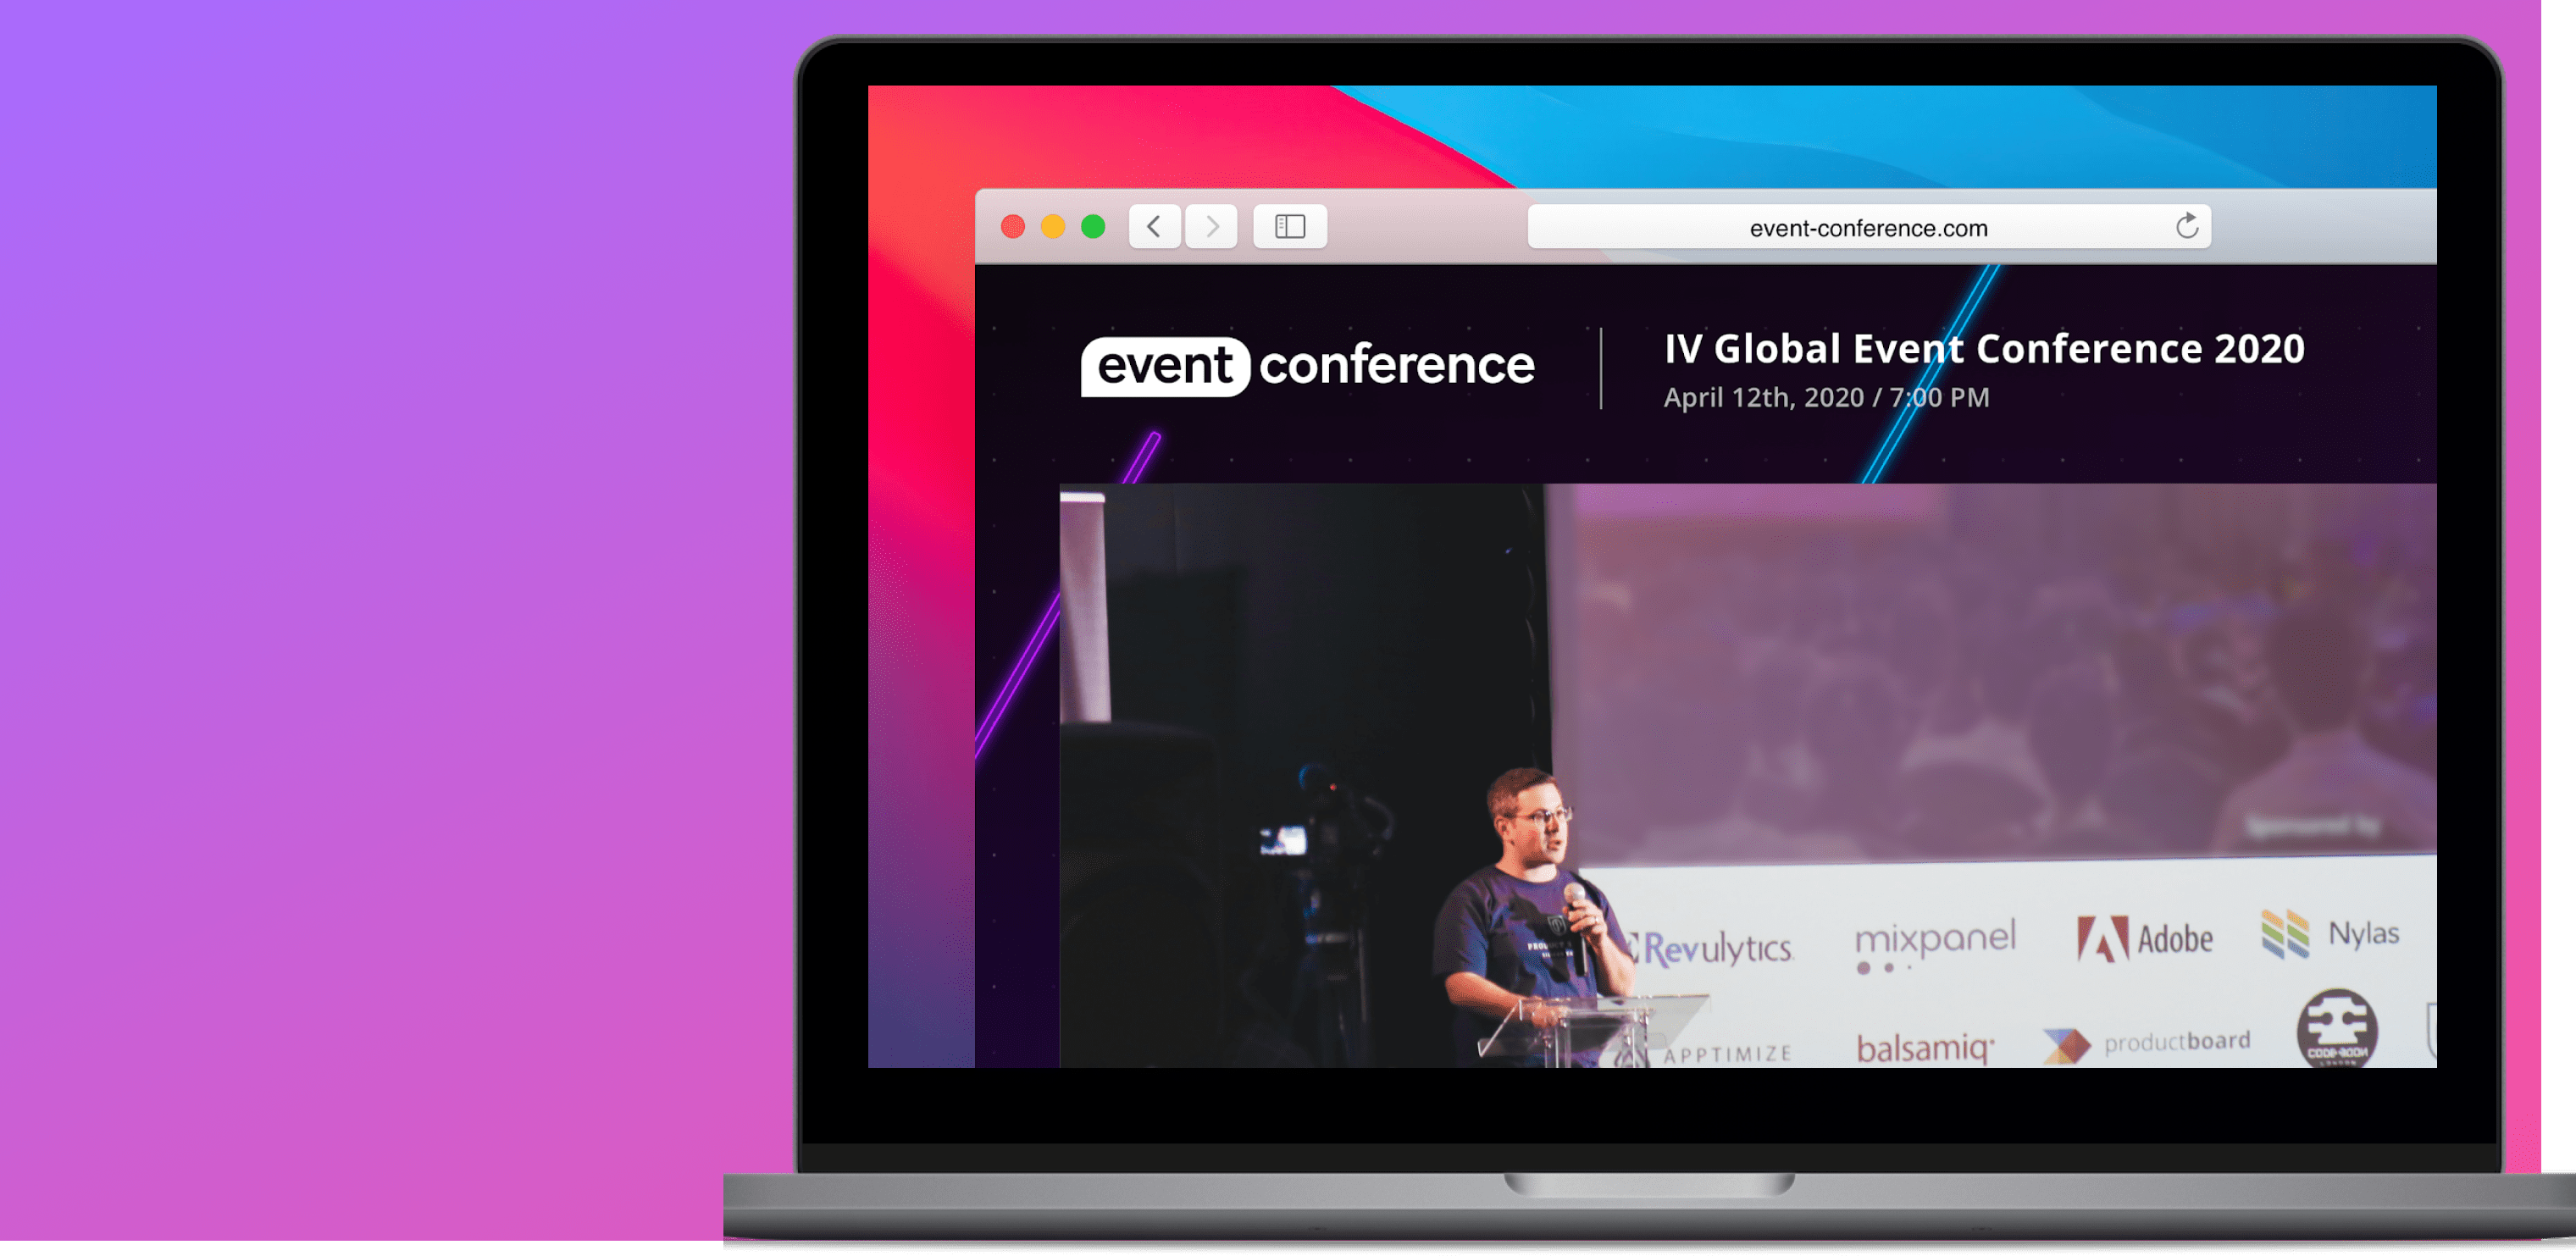 Live streams platform embedded into event websites, improved group chats, and other new features from the Eventicious platform